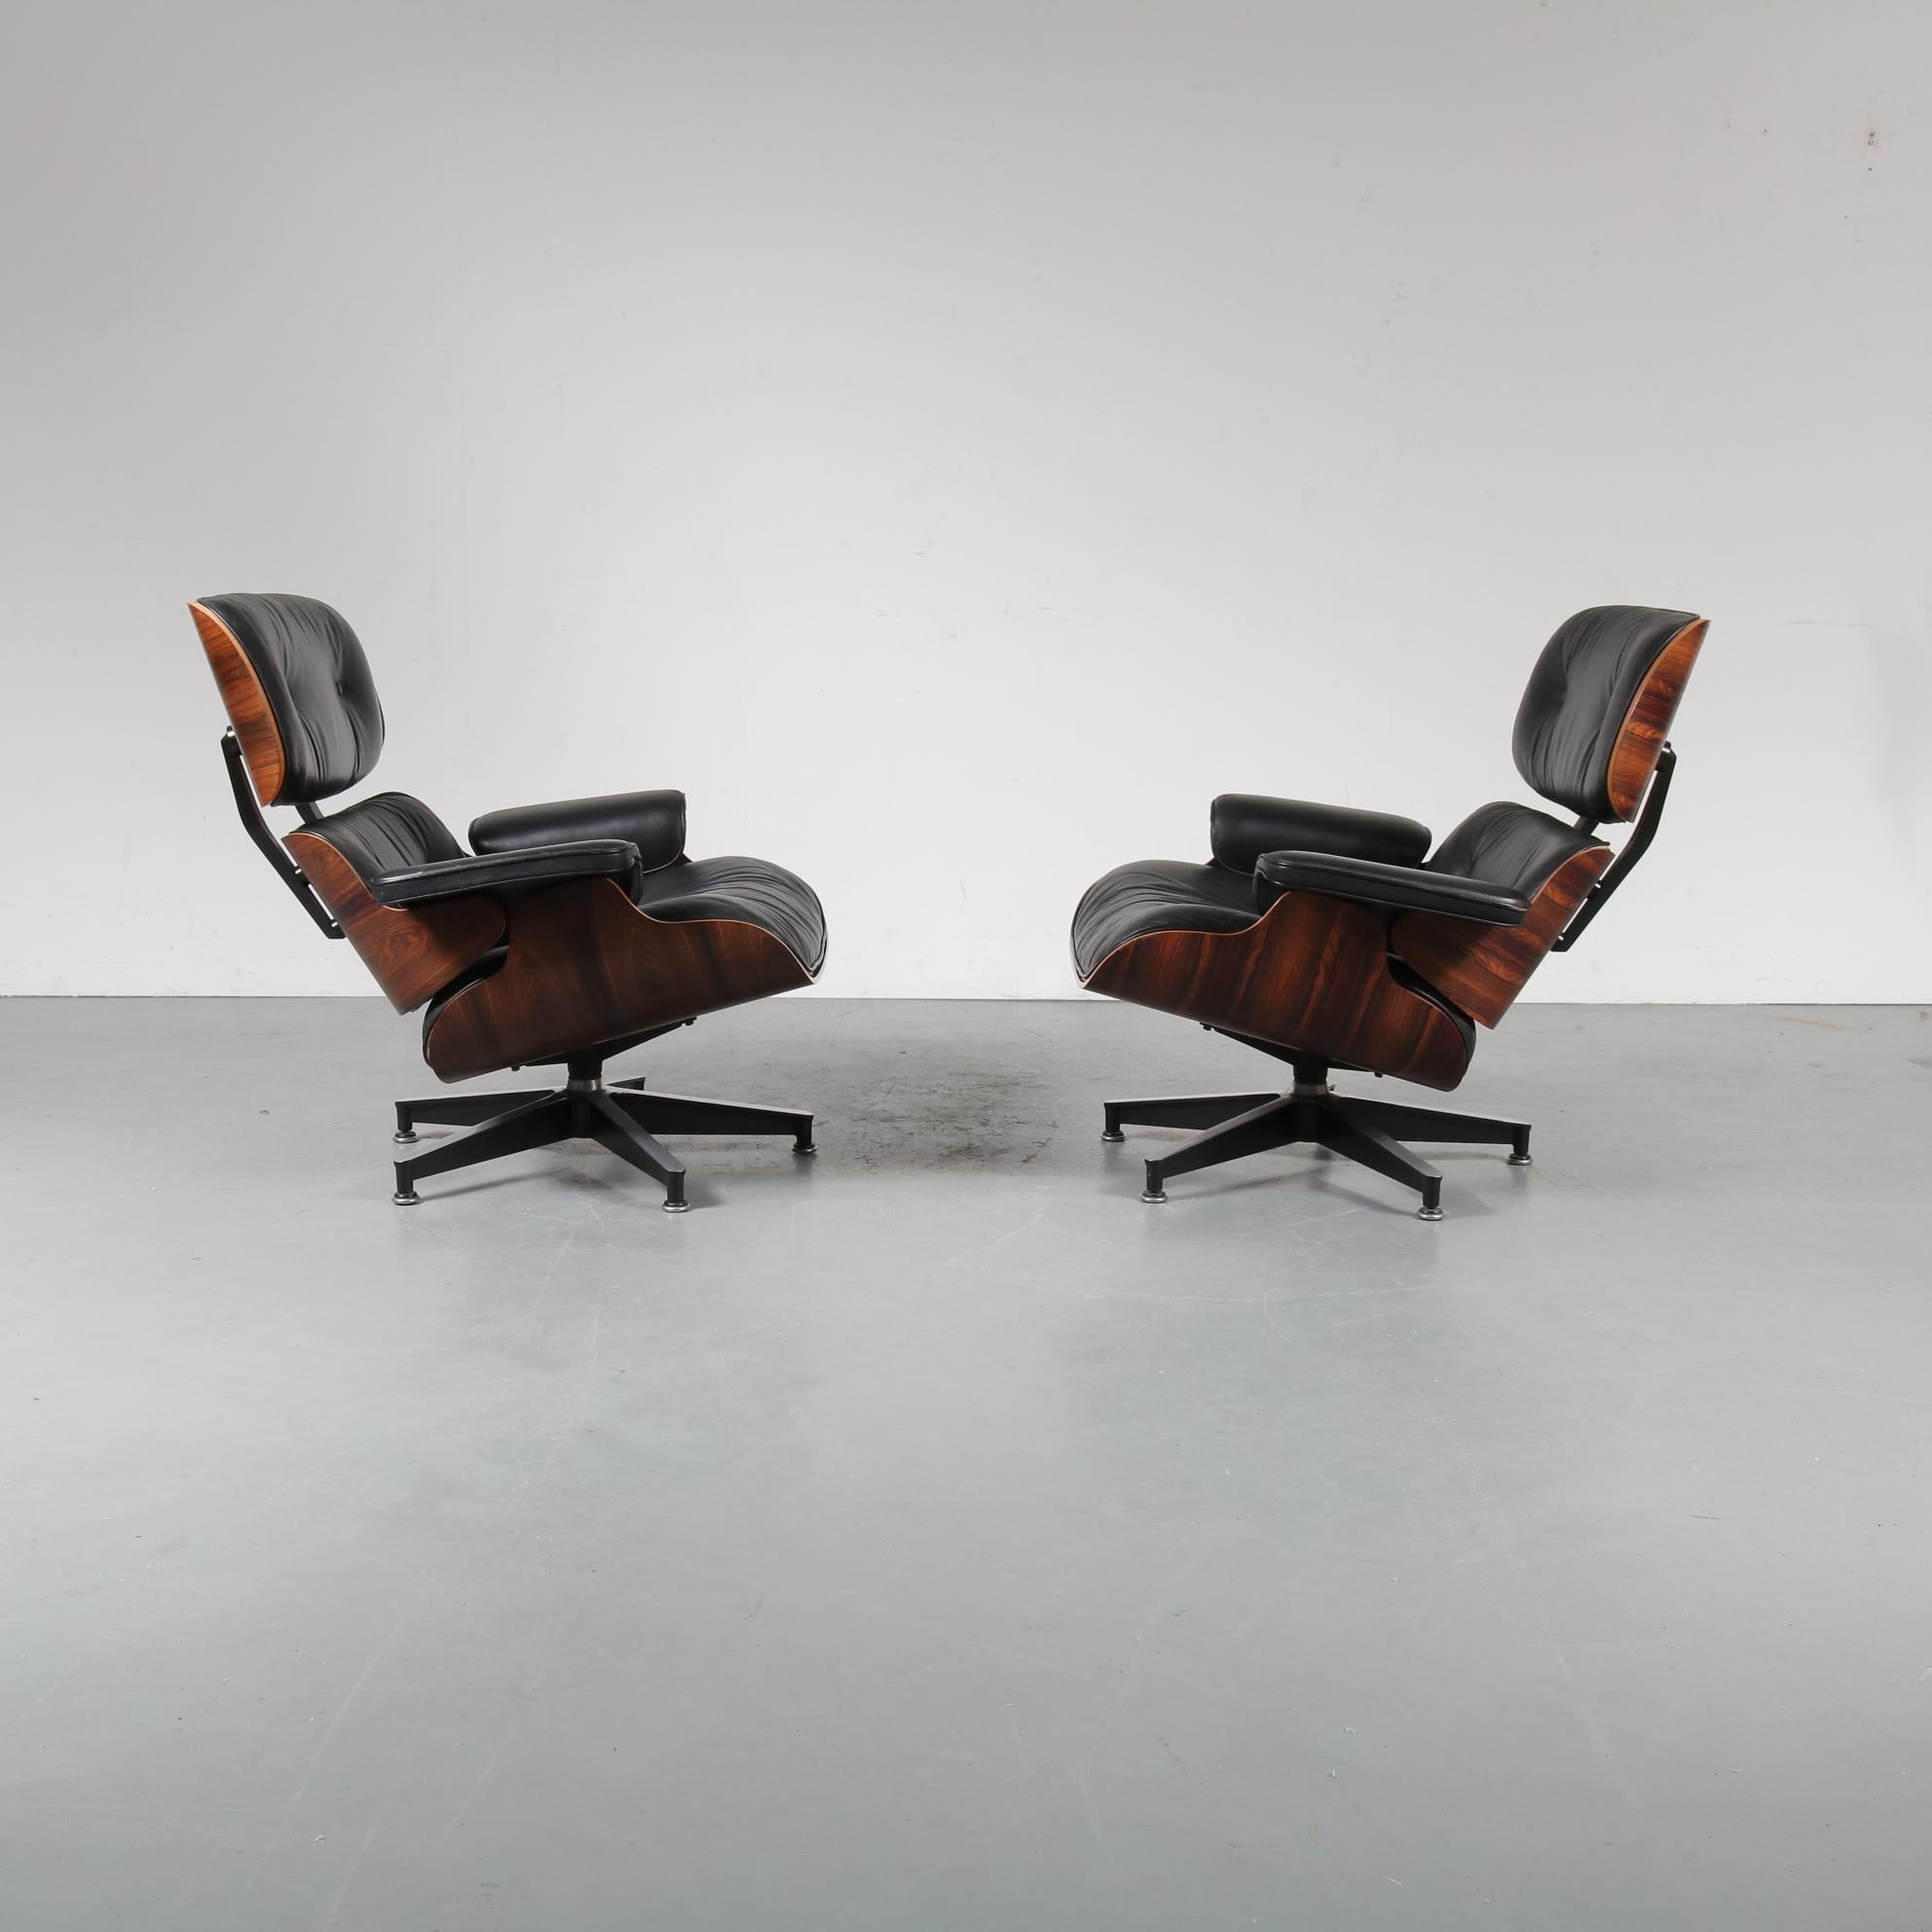 Pair of Charles and Ray Eames Lounge Chairs for Herman Miller, circa 1970 (Moderne der Mitte des Jahrhunderts)